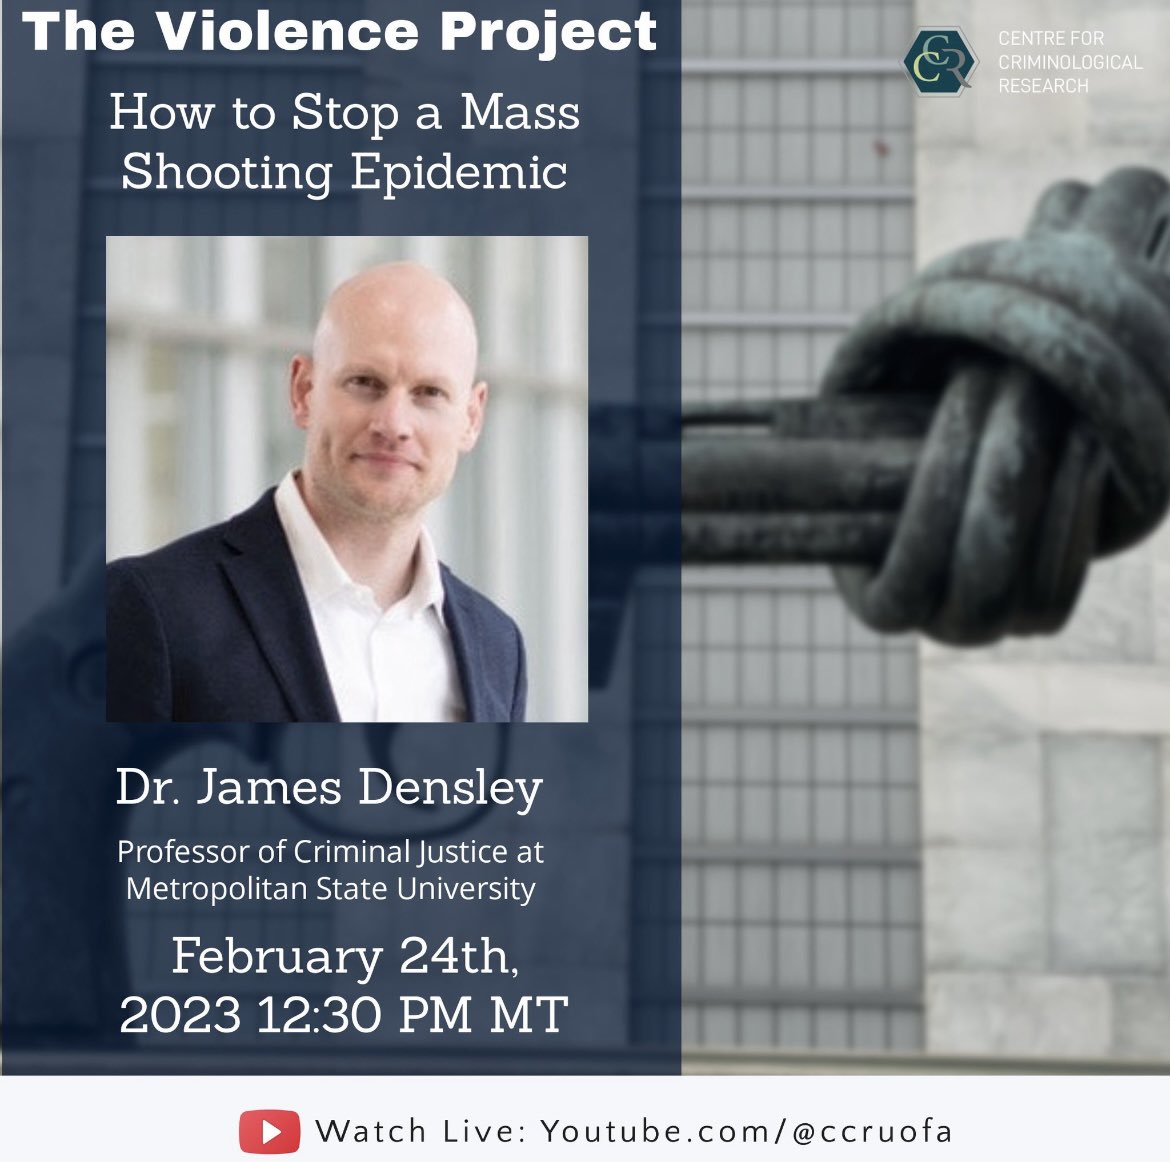 This *amazing* talk is happening tomorrow- “how to stop a mass shooting epidemic*! Free and open to everyone via our YouTube channel- be sure to join us and check it out @CCR_UofA @theviolencepro